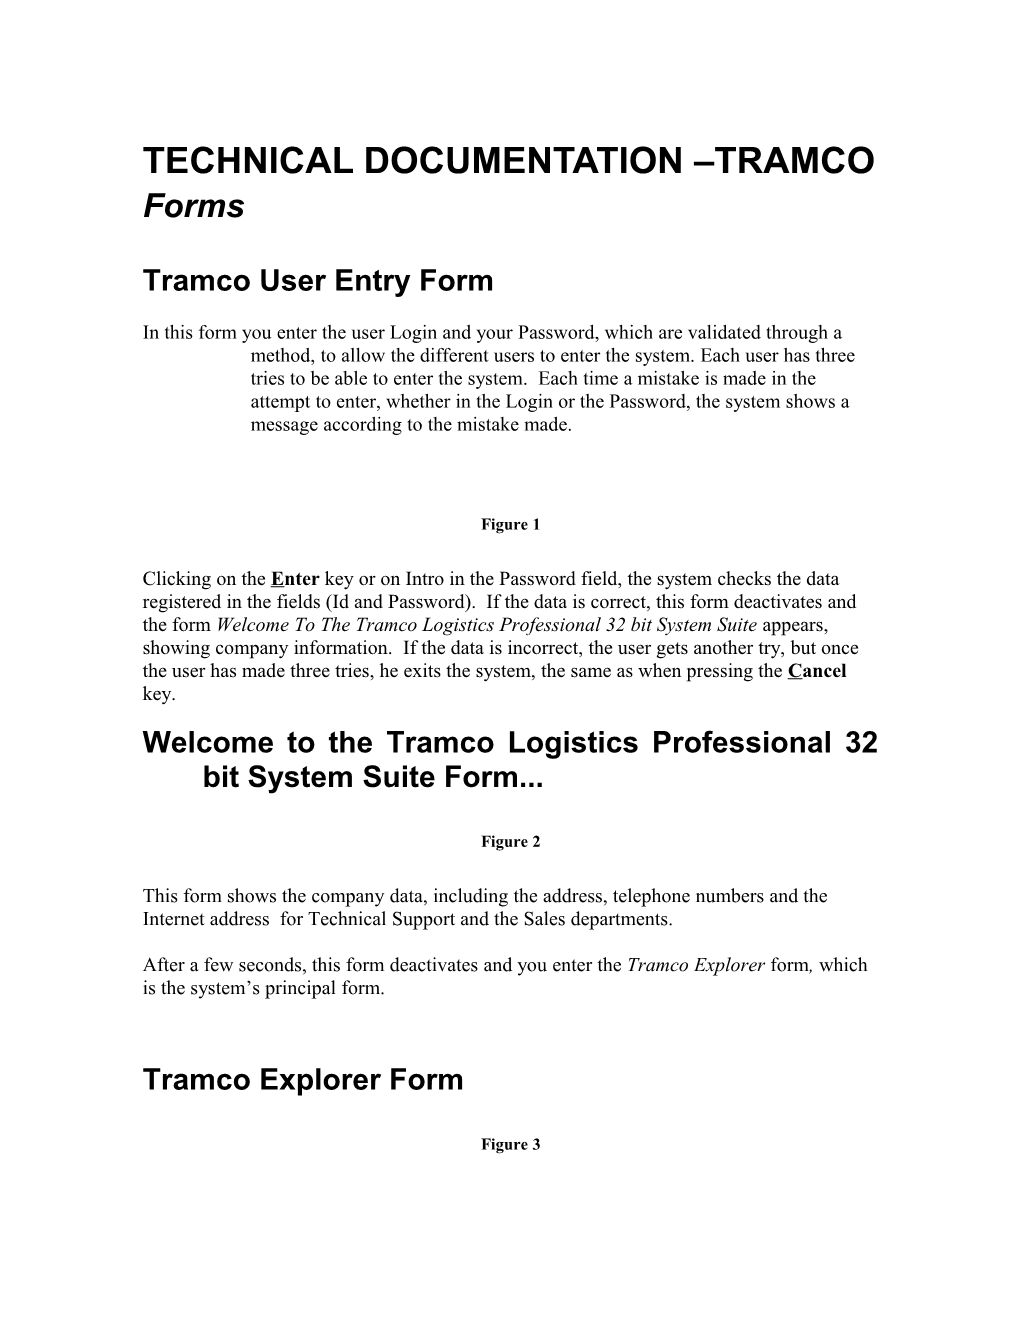 Tramco User Entry Form